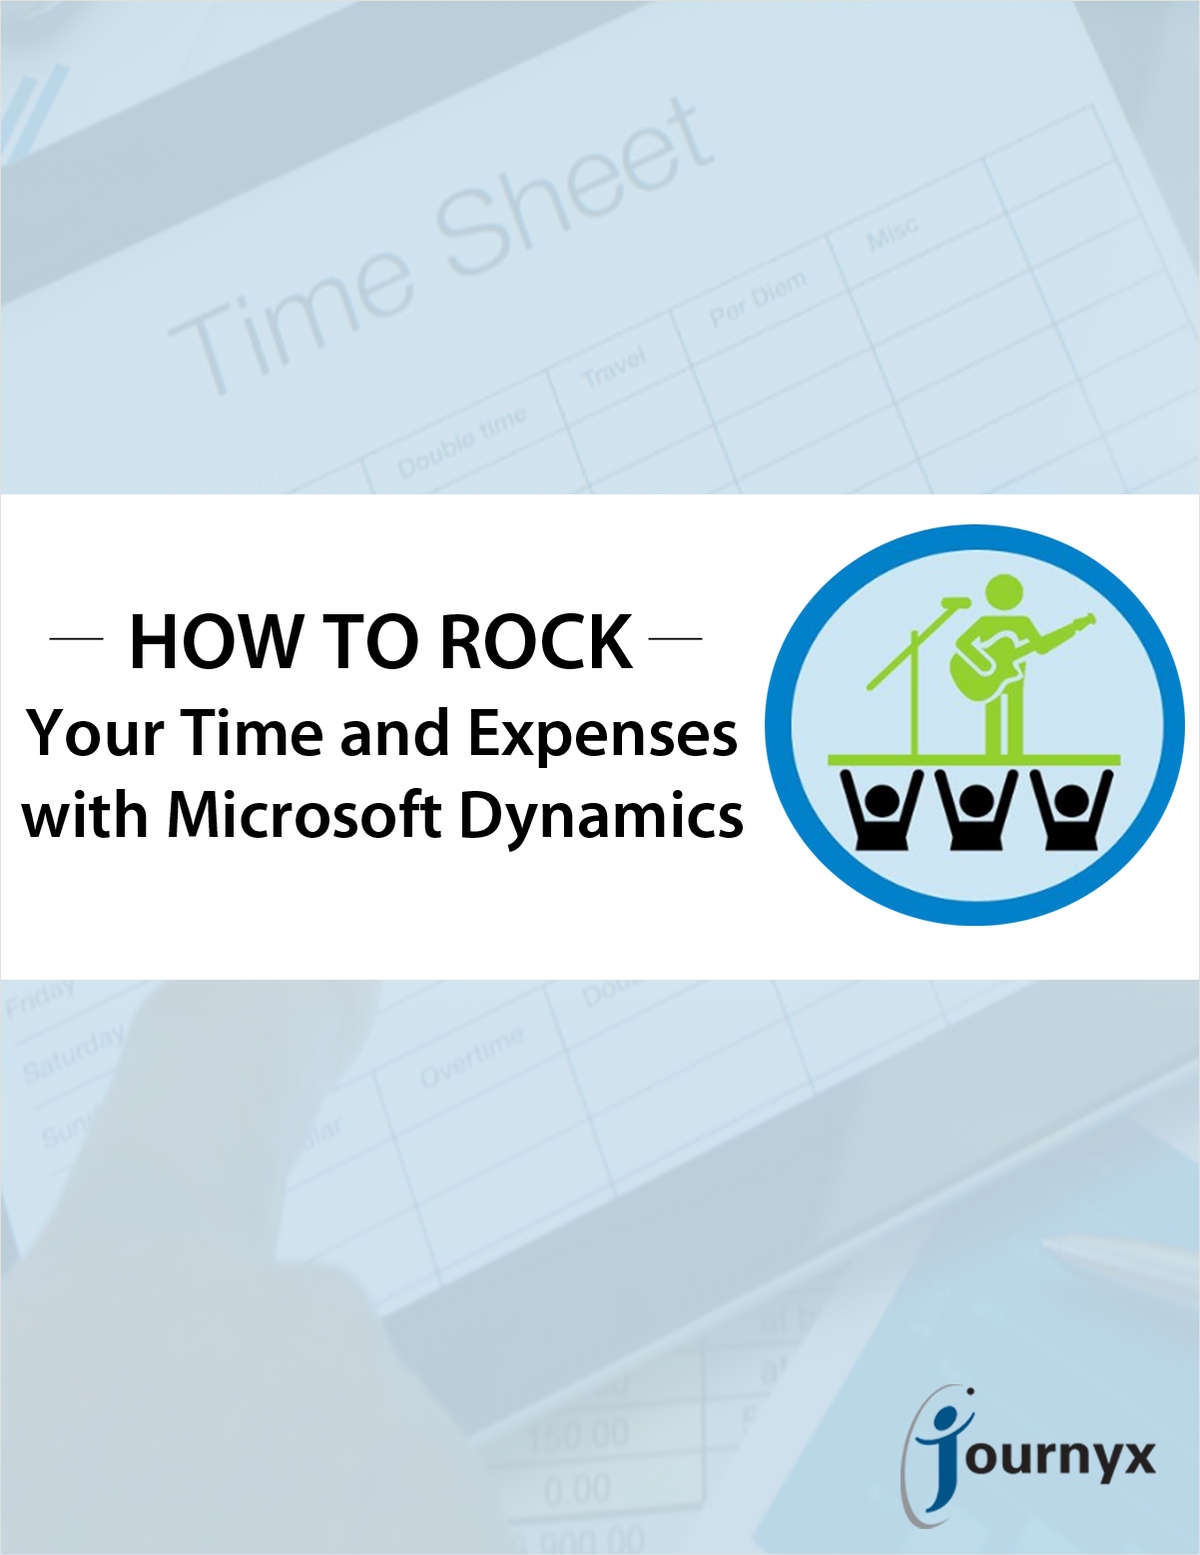 Checklist: How to Rock Your Time and Expenses with Microsoft Dynamics